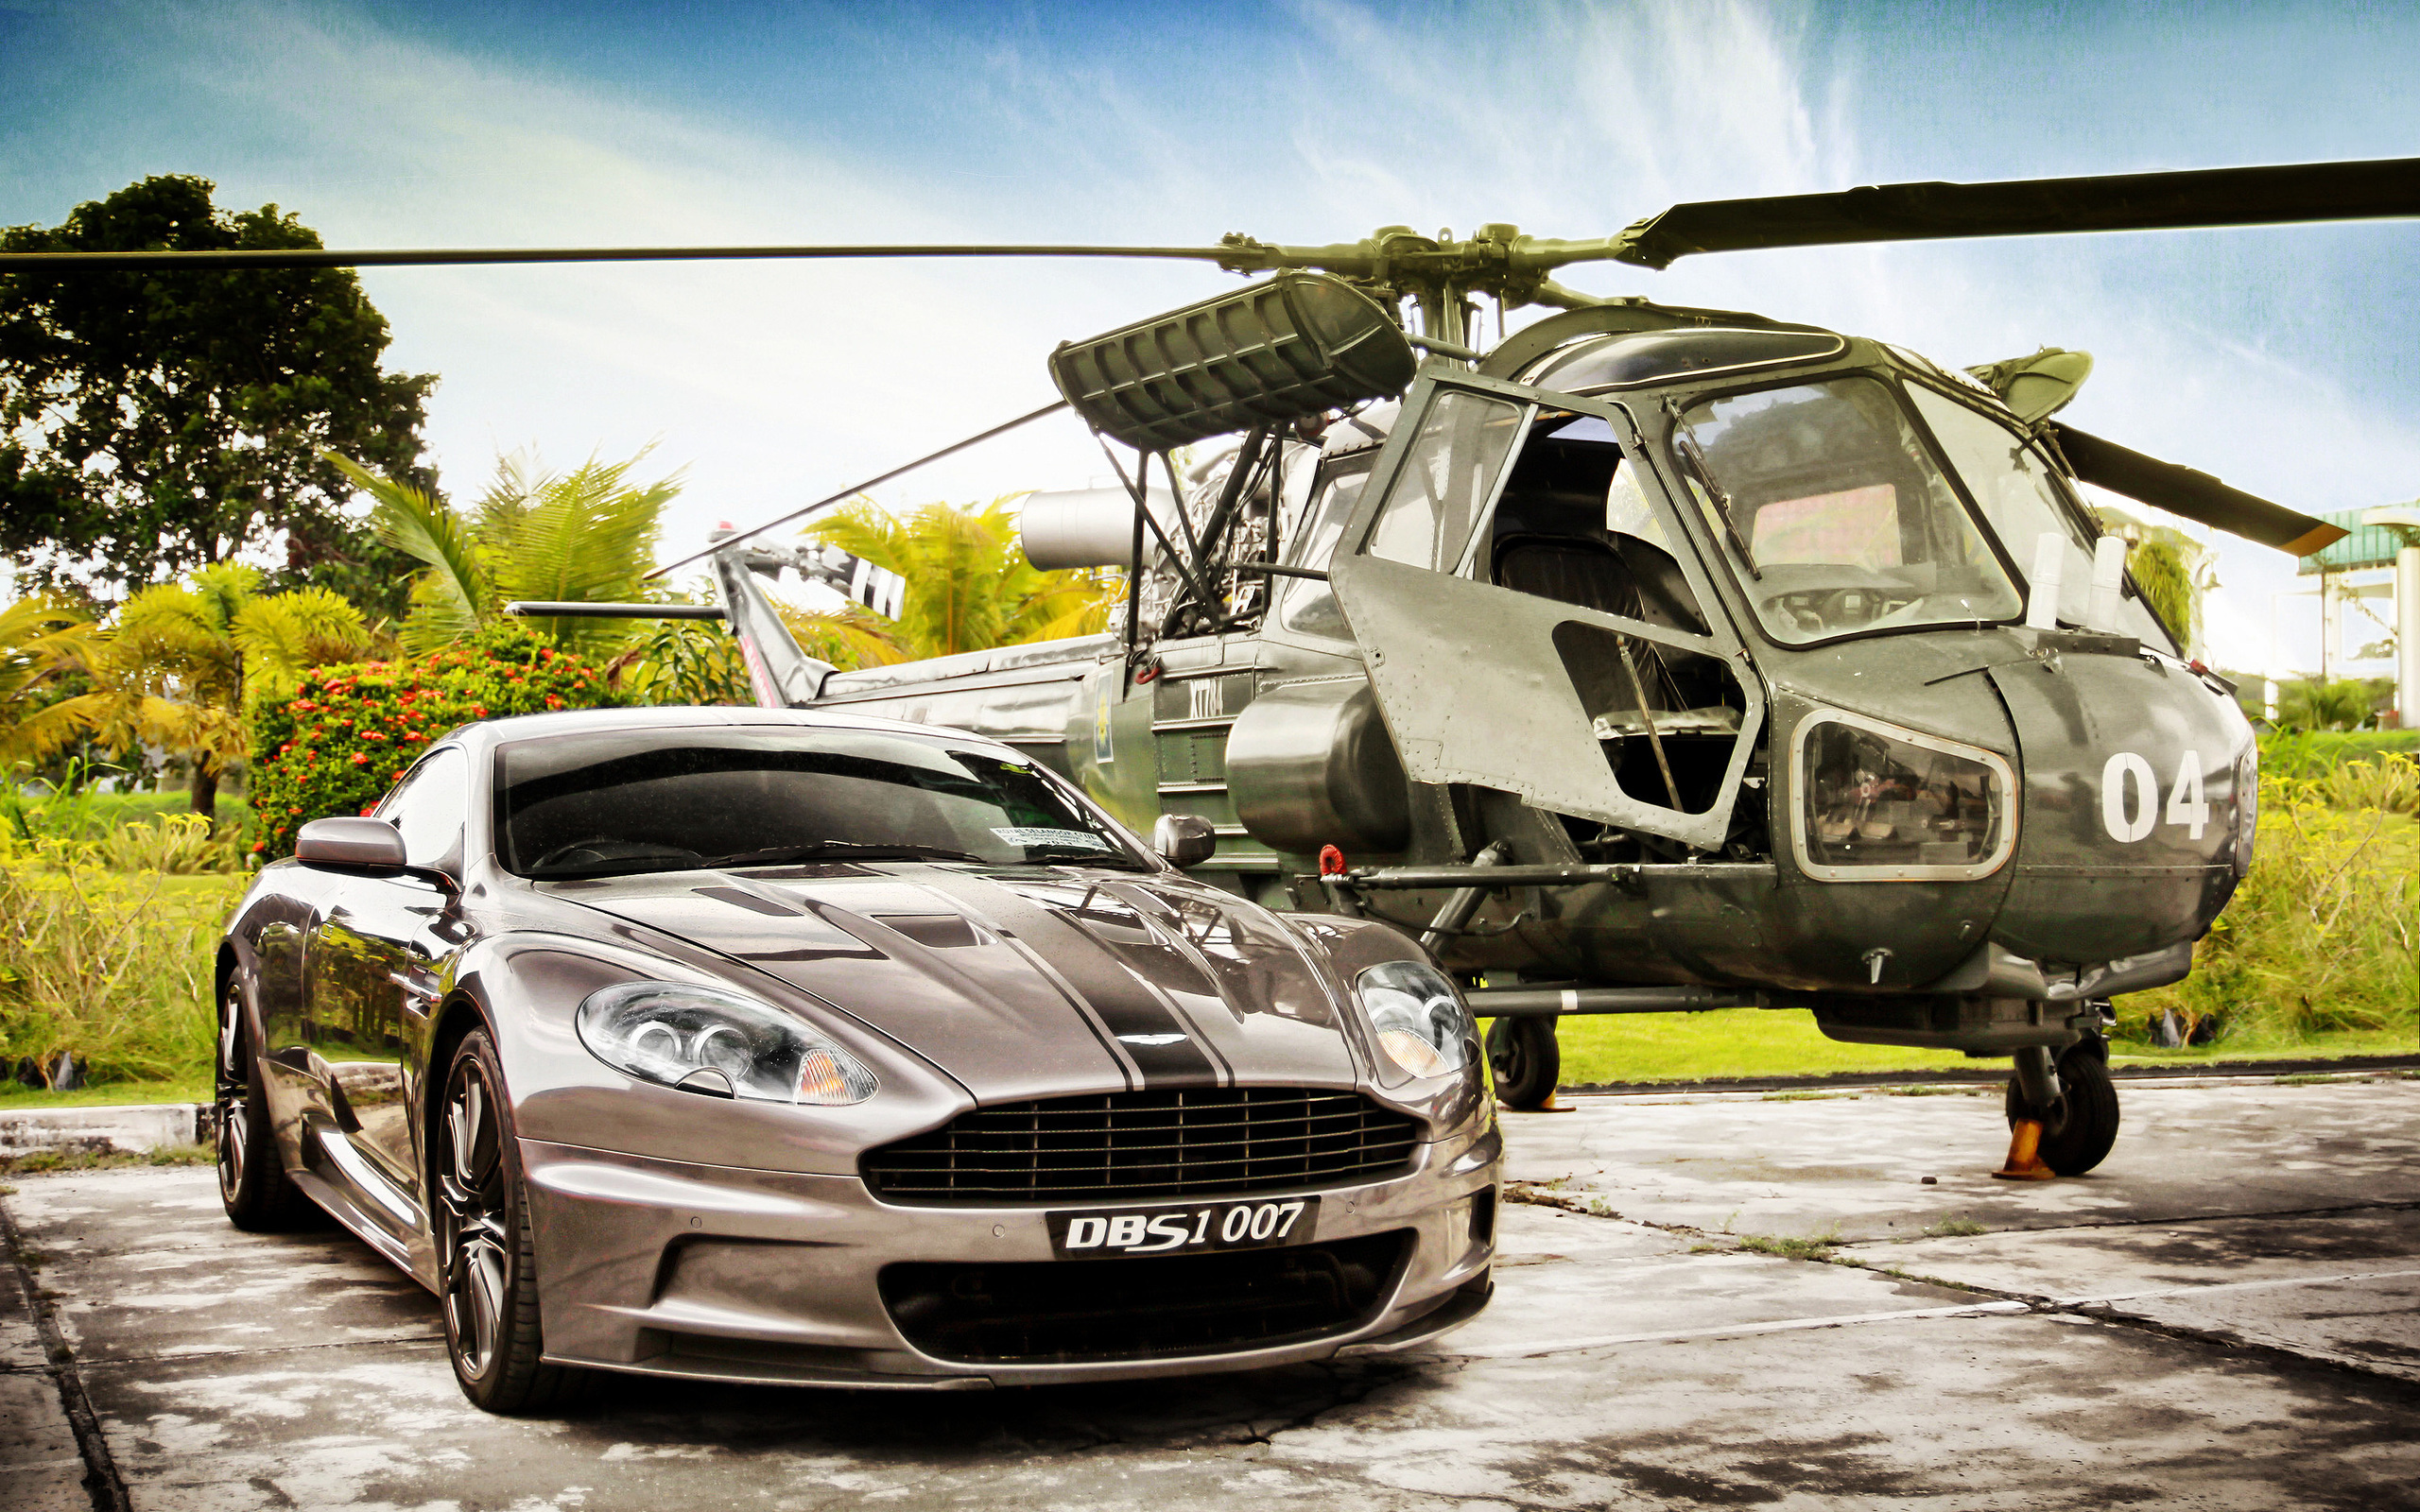 helicopters, transport, auto